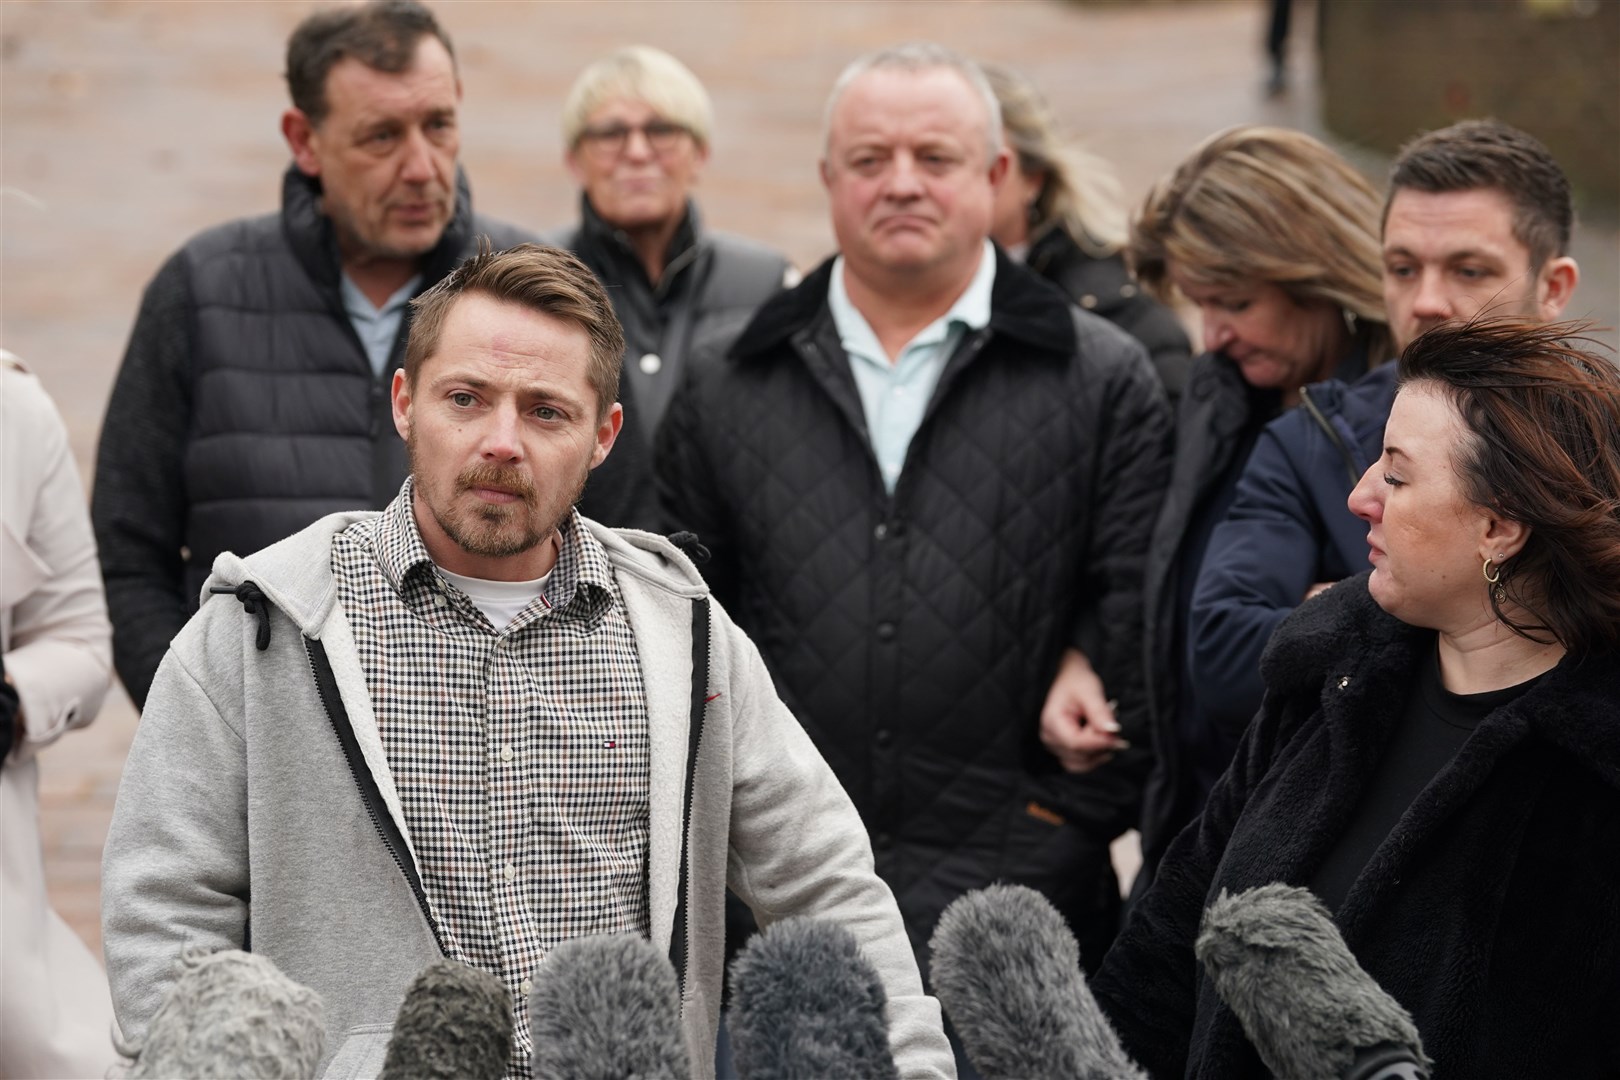 Sam Phillips, the father of Alfie Phillips, spoke to the media outside Maidstone Crown Court, Kent (Gareth Fuller/PA)